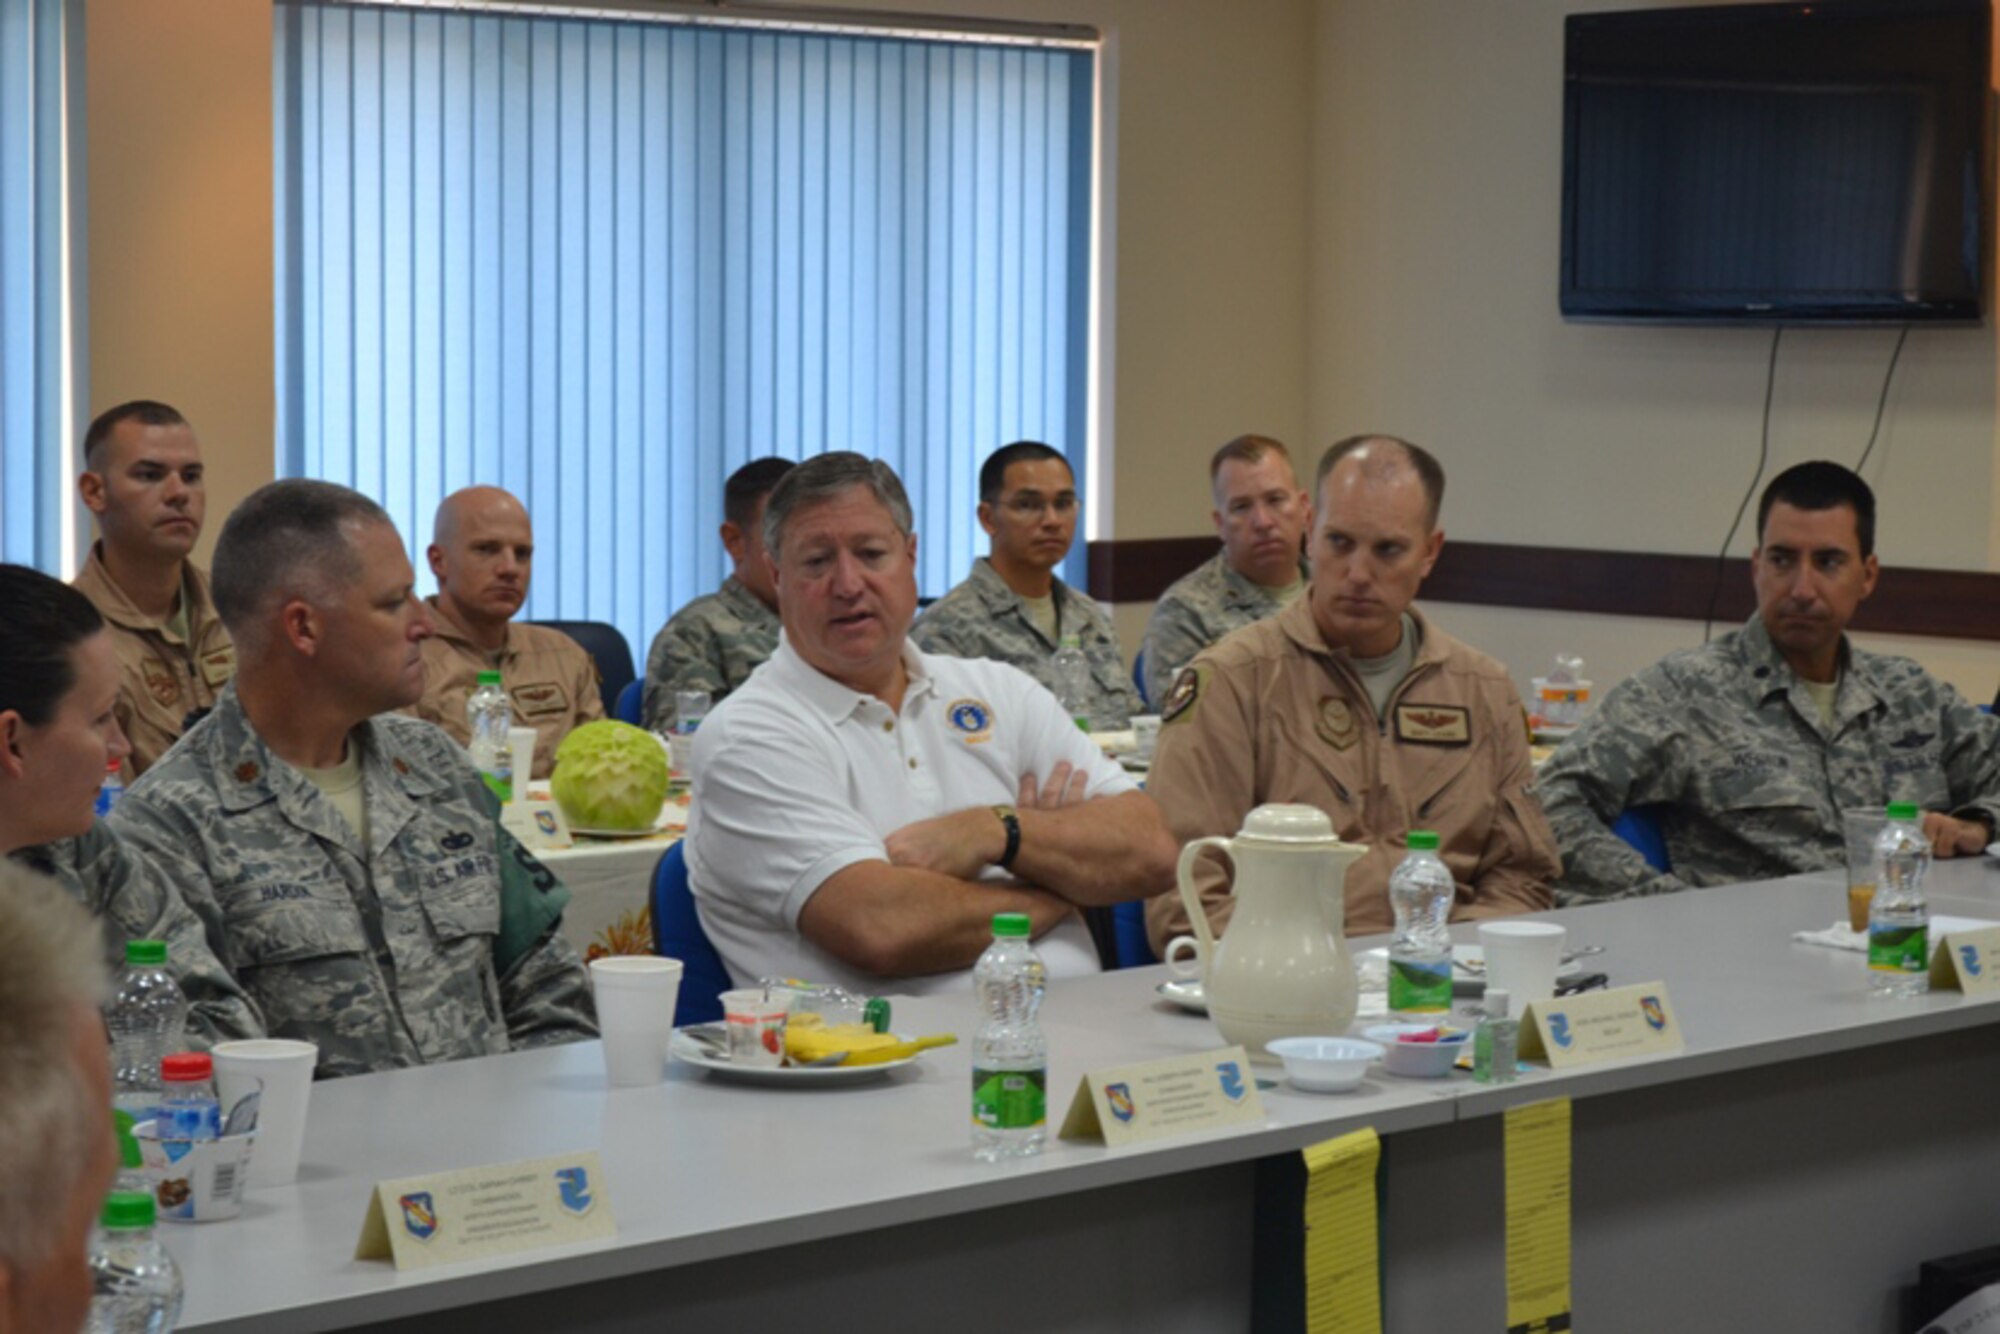 SOUTHWEST ASIA – Secretary of the Air Force Michael B. Donley, center, visits with members of the South Dakota Air National Guard’s 114th Security Forces Squadron during a leadership breakfast while on a visit to Southwest Asia Aug. 24, 2012. The 114th SFS, based out of Joe Foss Field in Sioux Falls, S.D., has been deployed since April and has been providing law enforcement, troop escort and security work within a base in Southwest Asia. (U.S. Air Force photo by 405th Expeditionary Security Forces Squadron) (RELEASED)